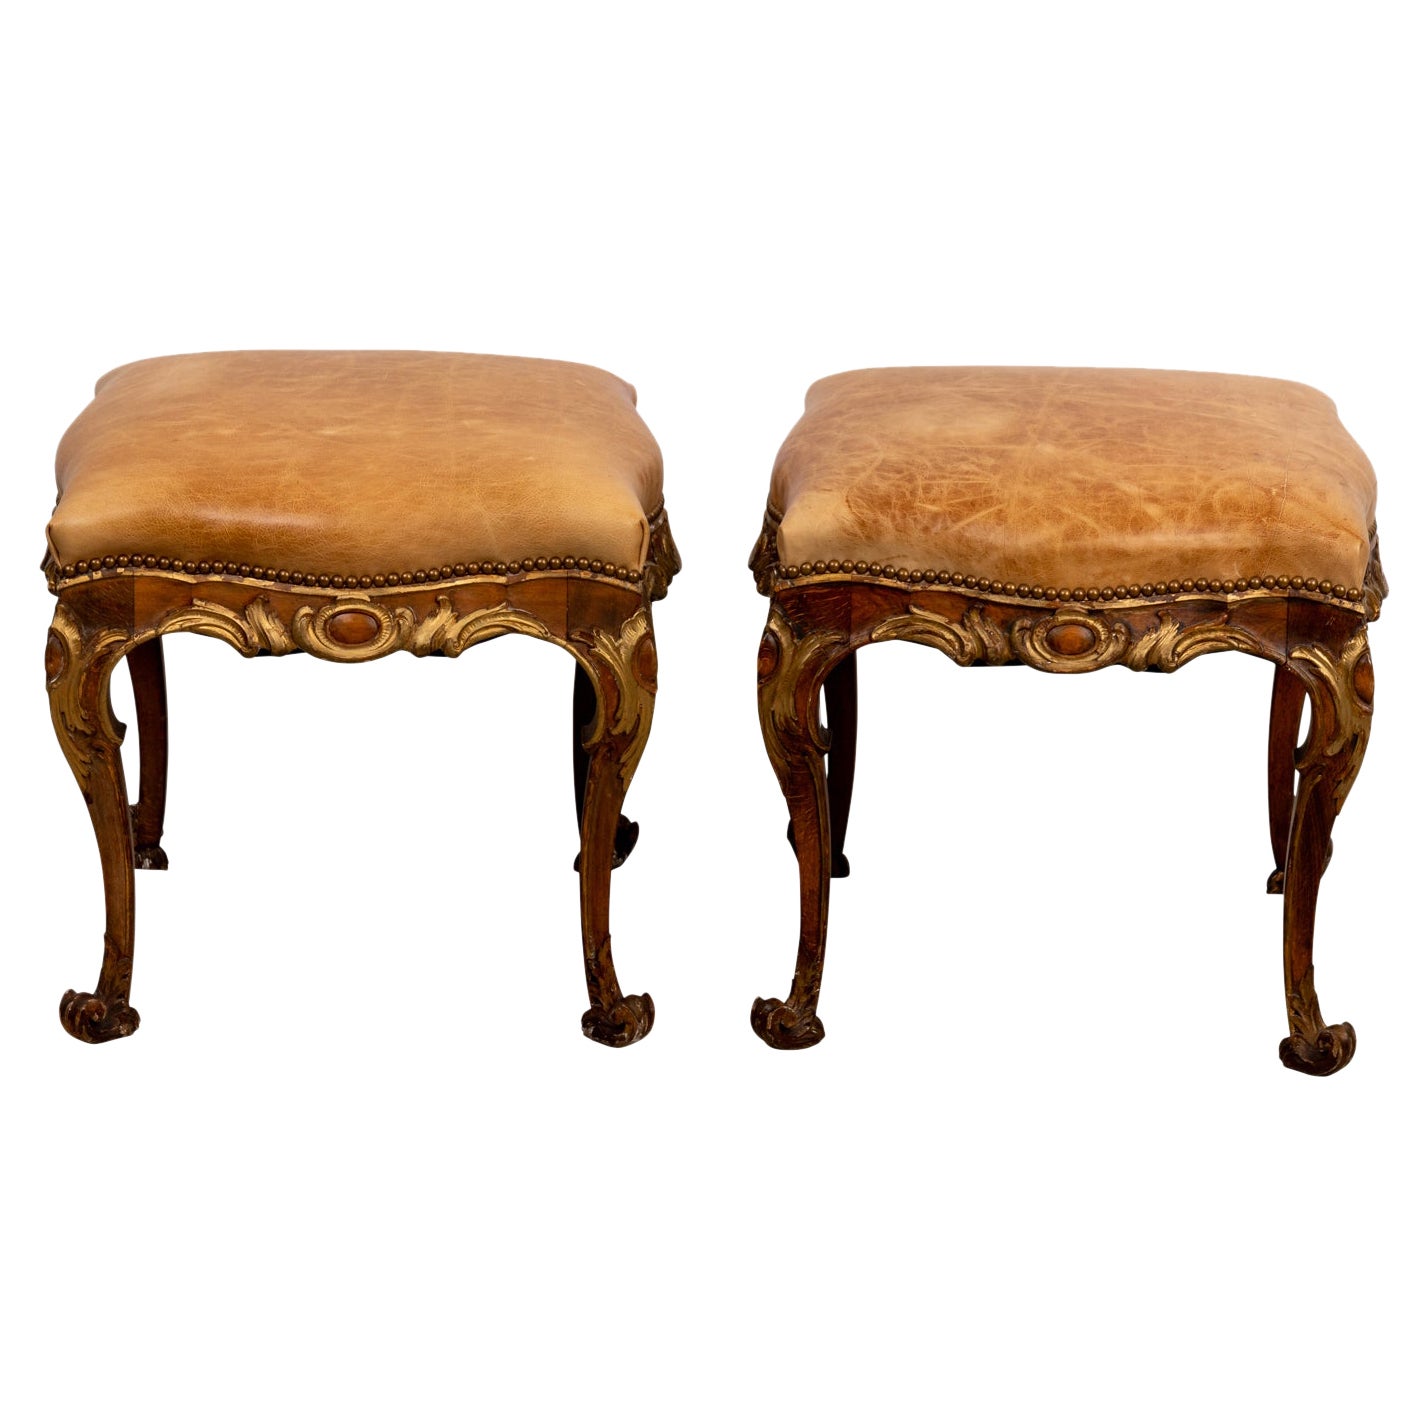 Pair of Rococo Style Footstools